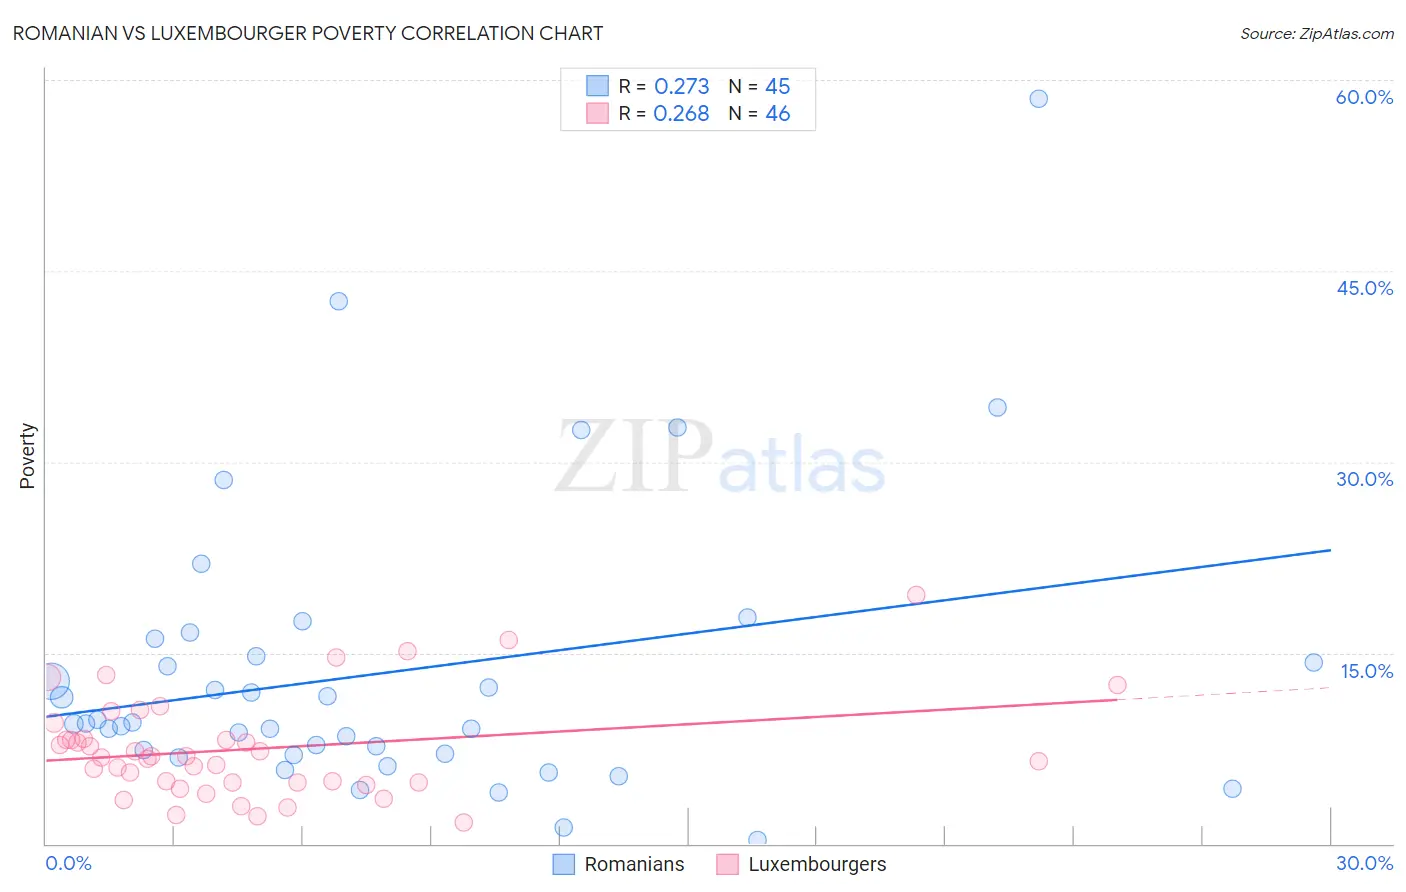 Romanian vs Luxembourger Poverty